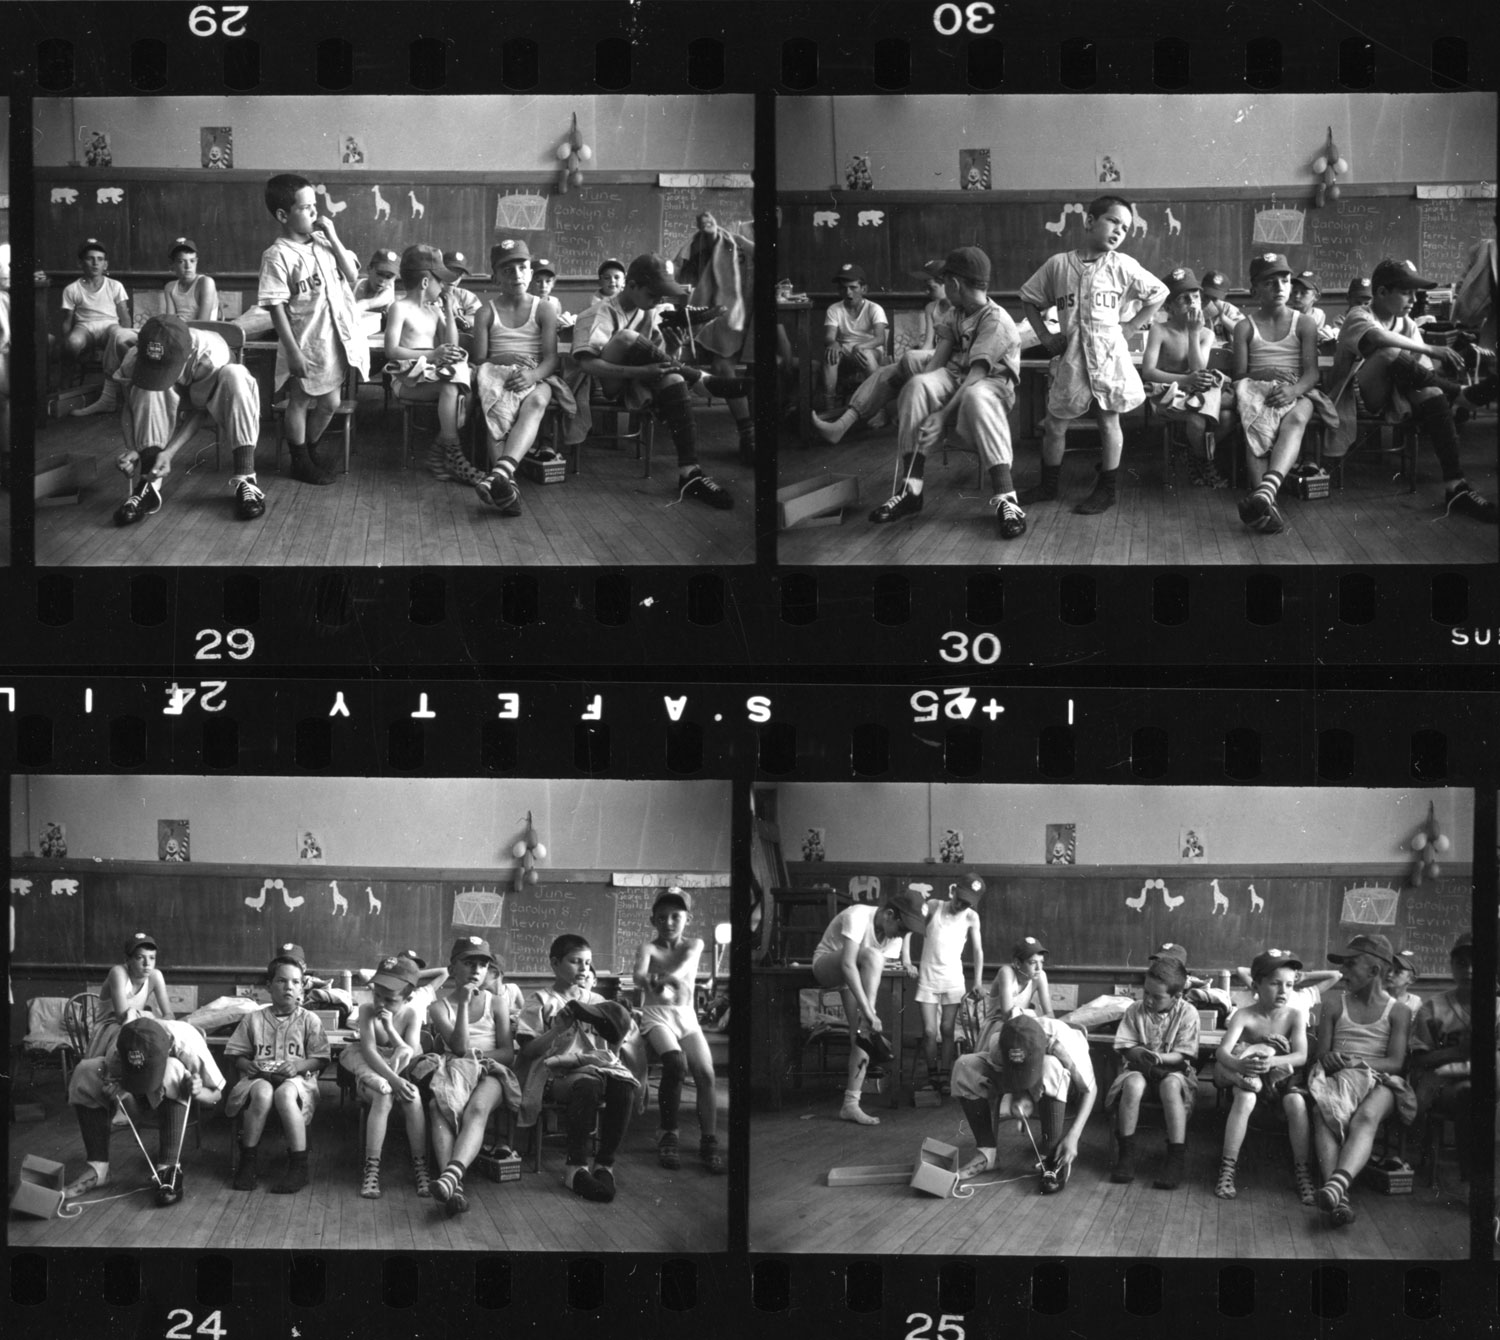 Contact sheet of images by LIFE photographer Yale Joel, 1954.